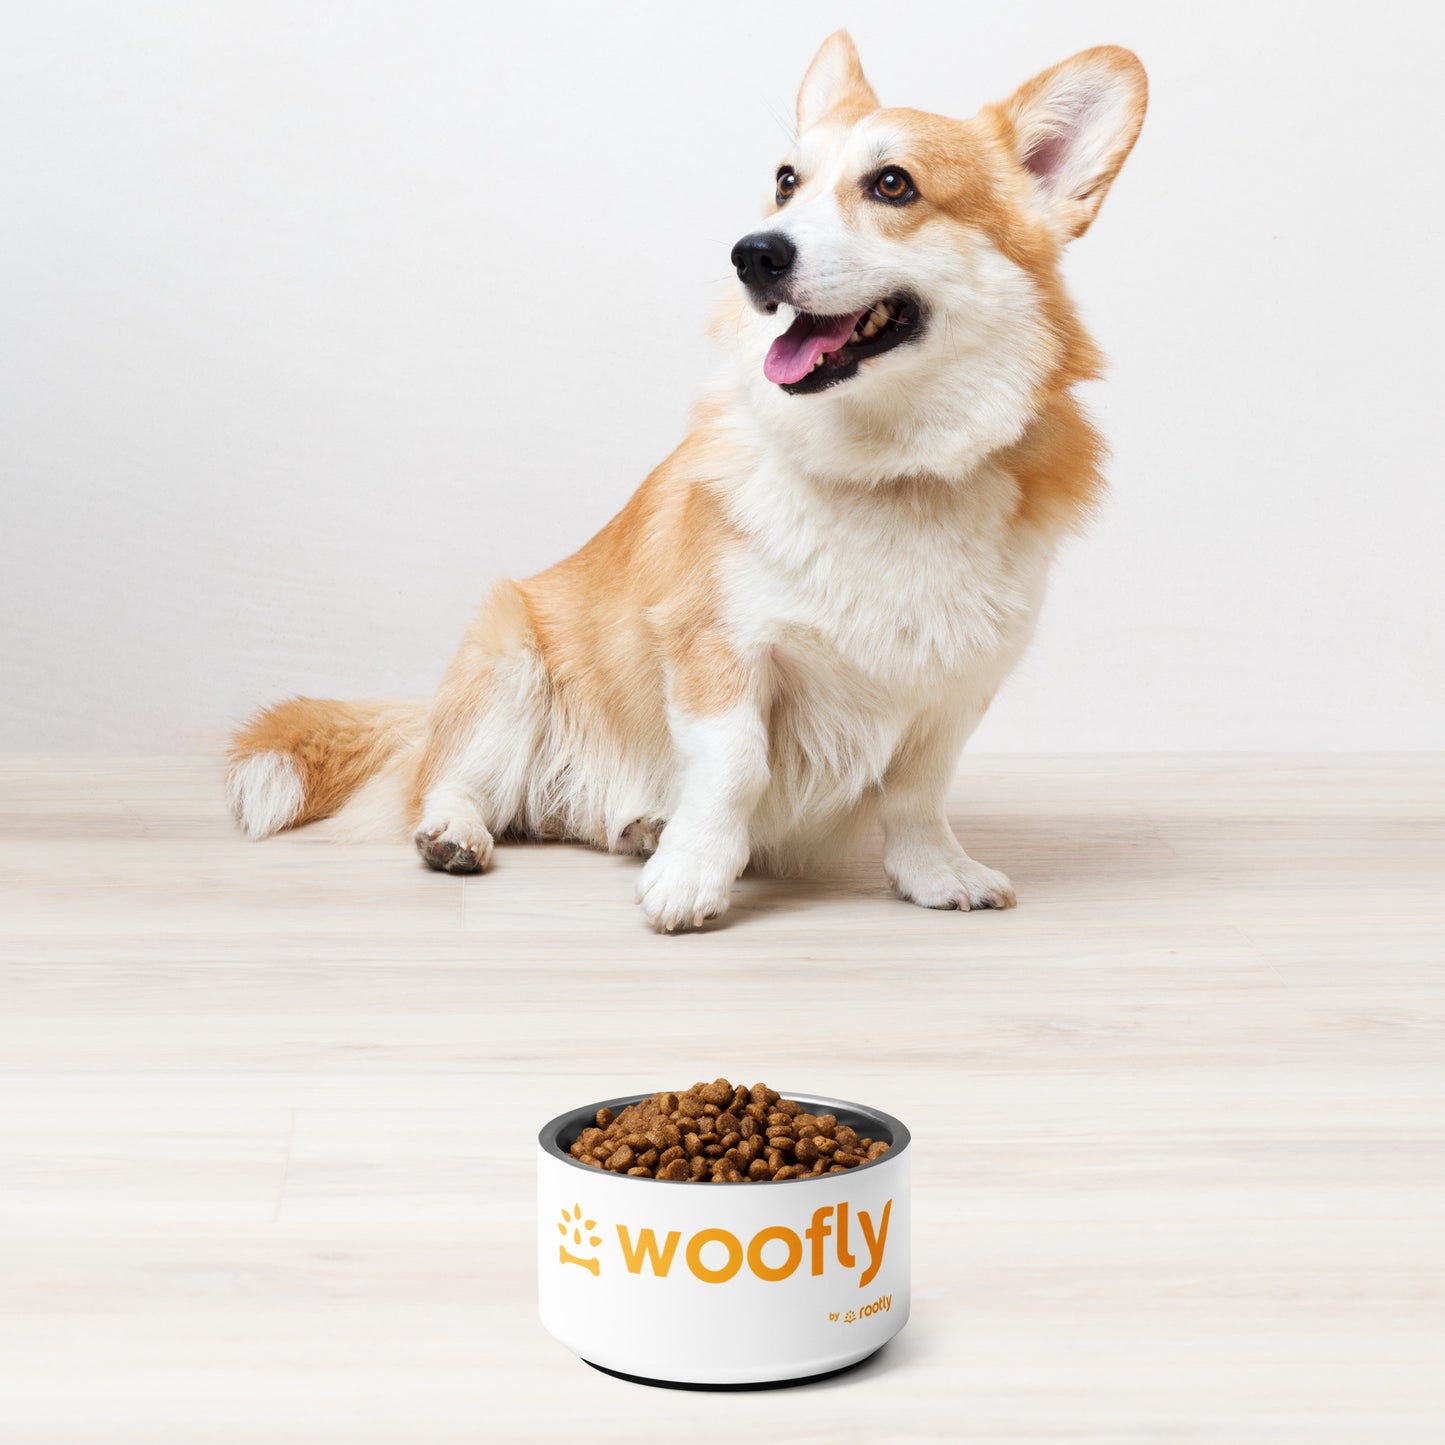 Woofly (by Rootly) Pet Bowl